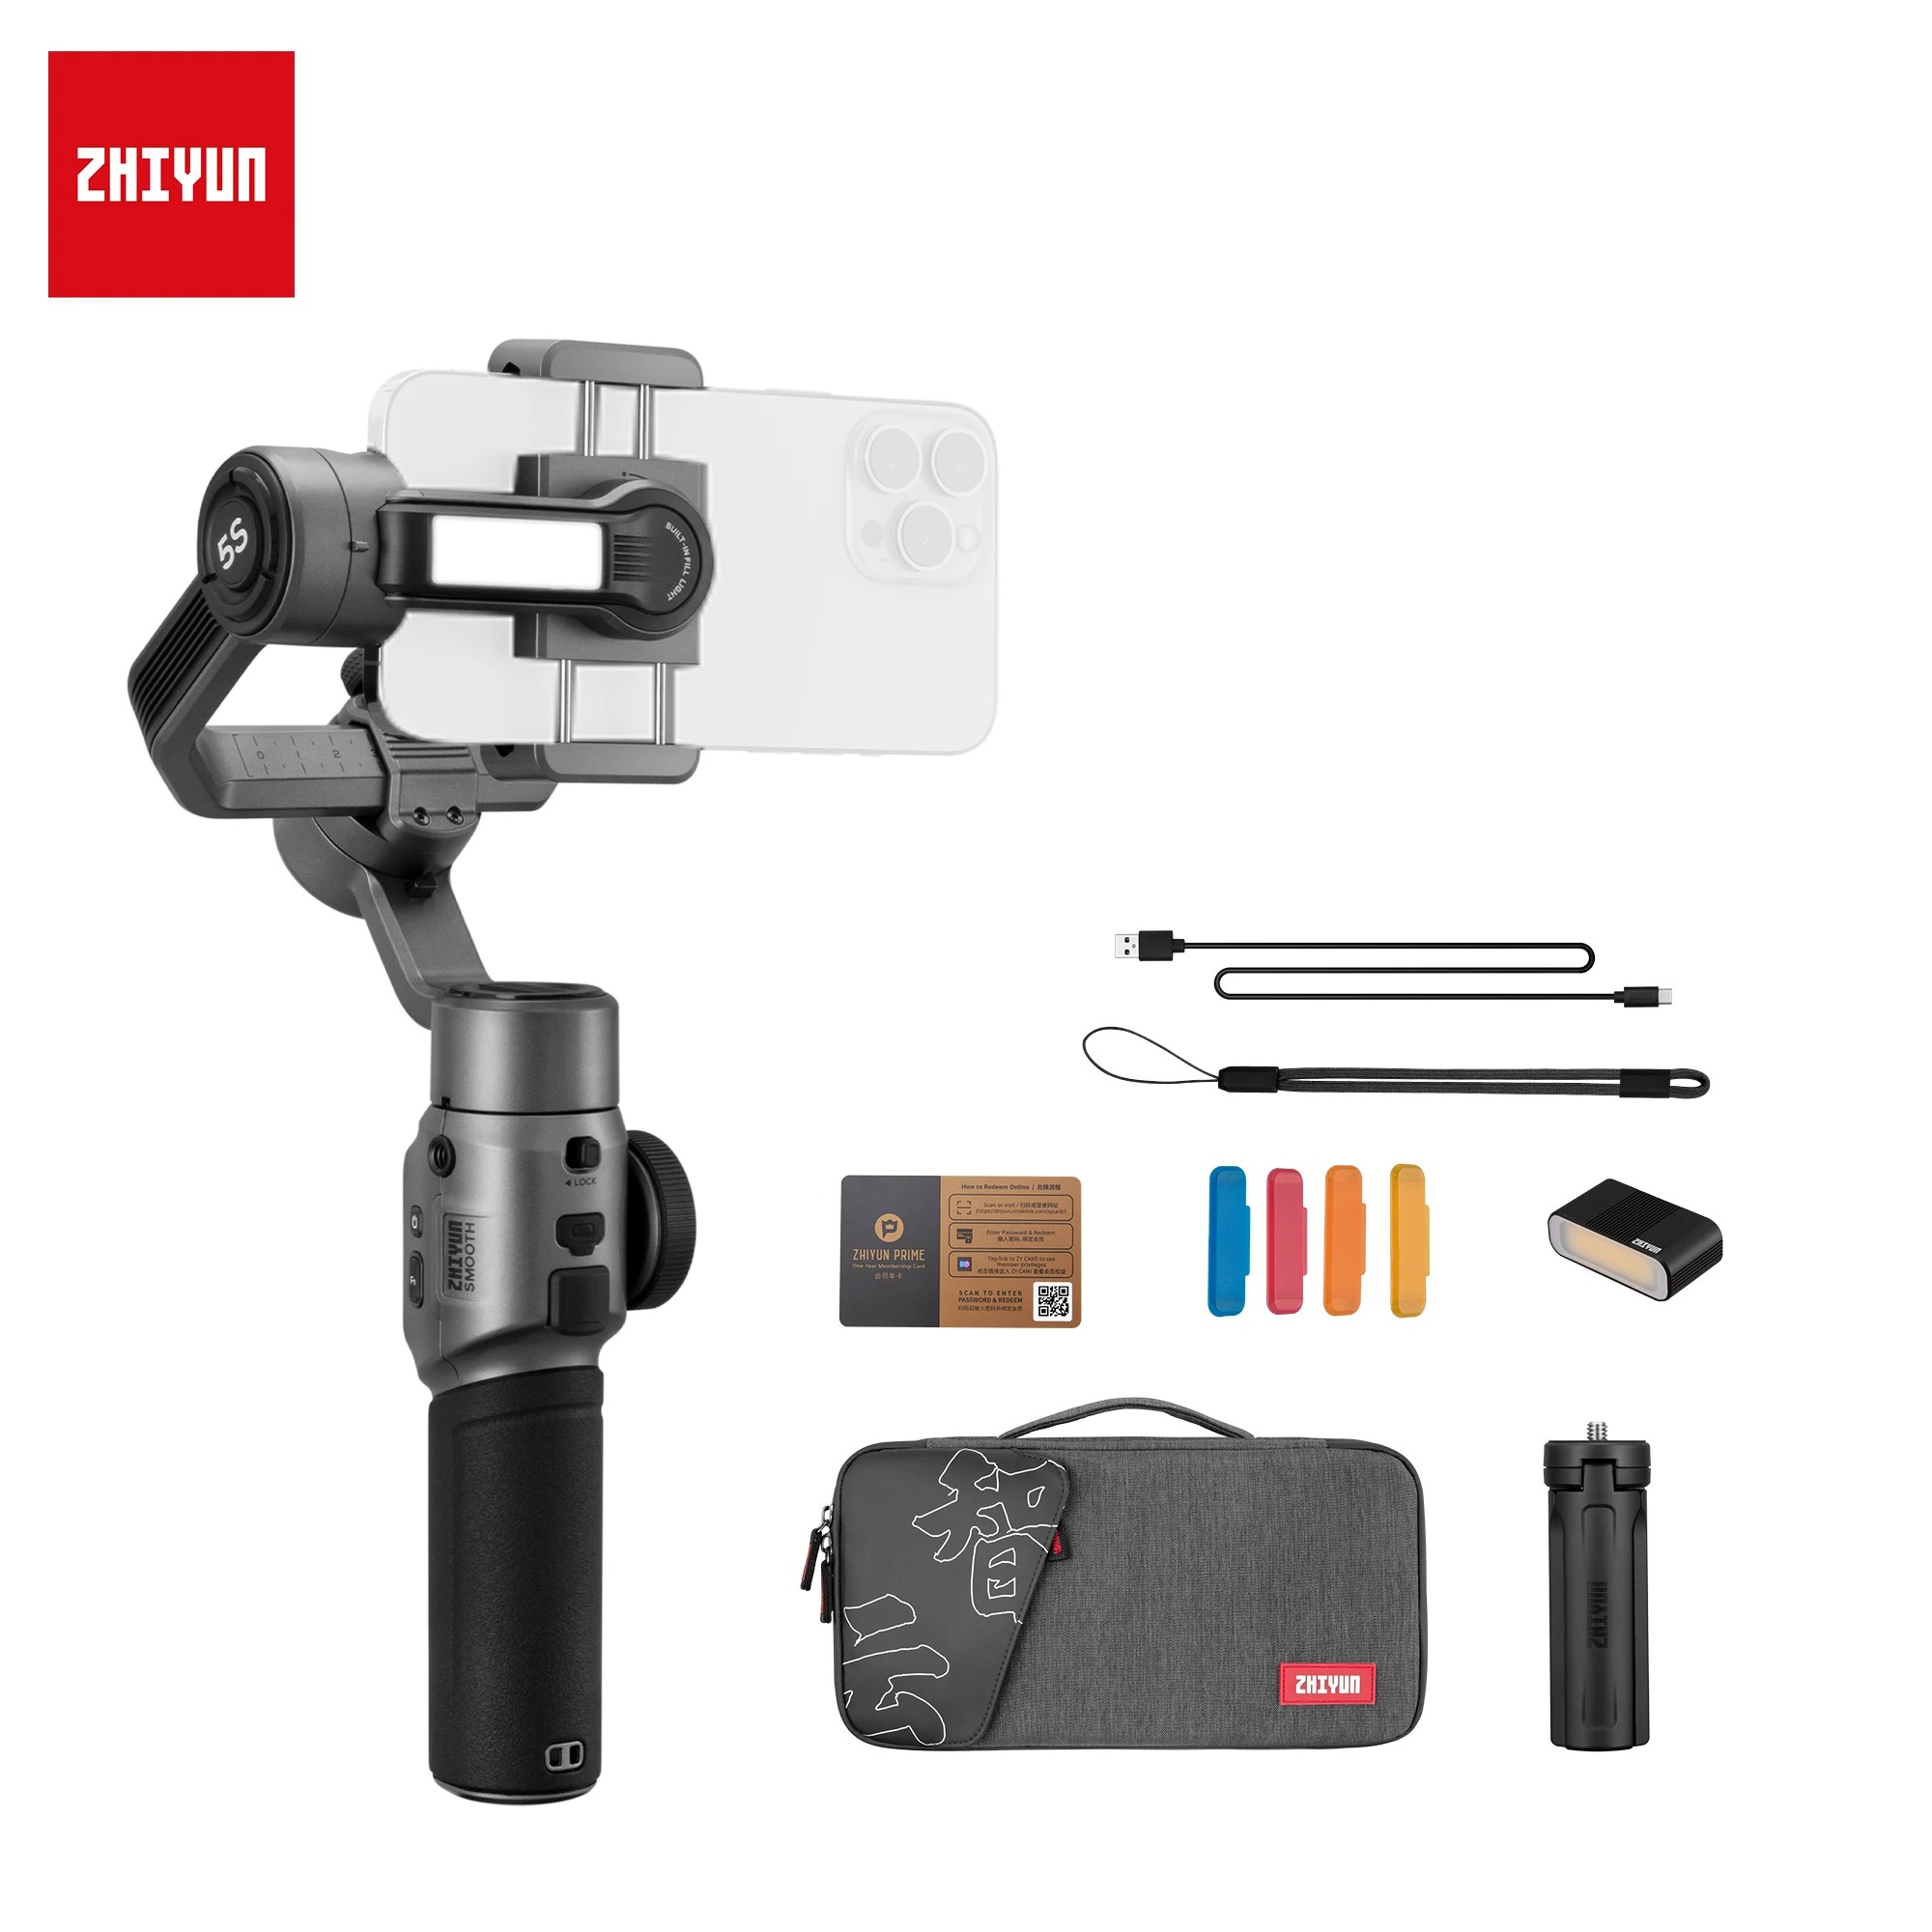 

ZHIYUN Smooth 5S 3-Axis Gimbal Stabilizer for Smartphone DSLR Camera Anti-Shake Make Movie IN STOCK NOW